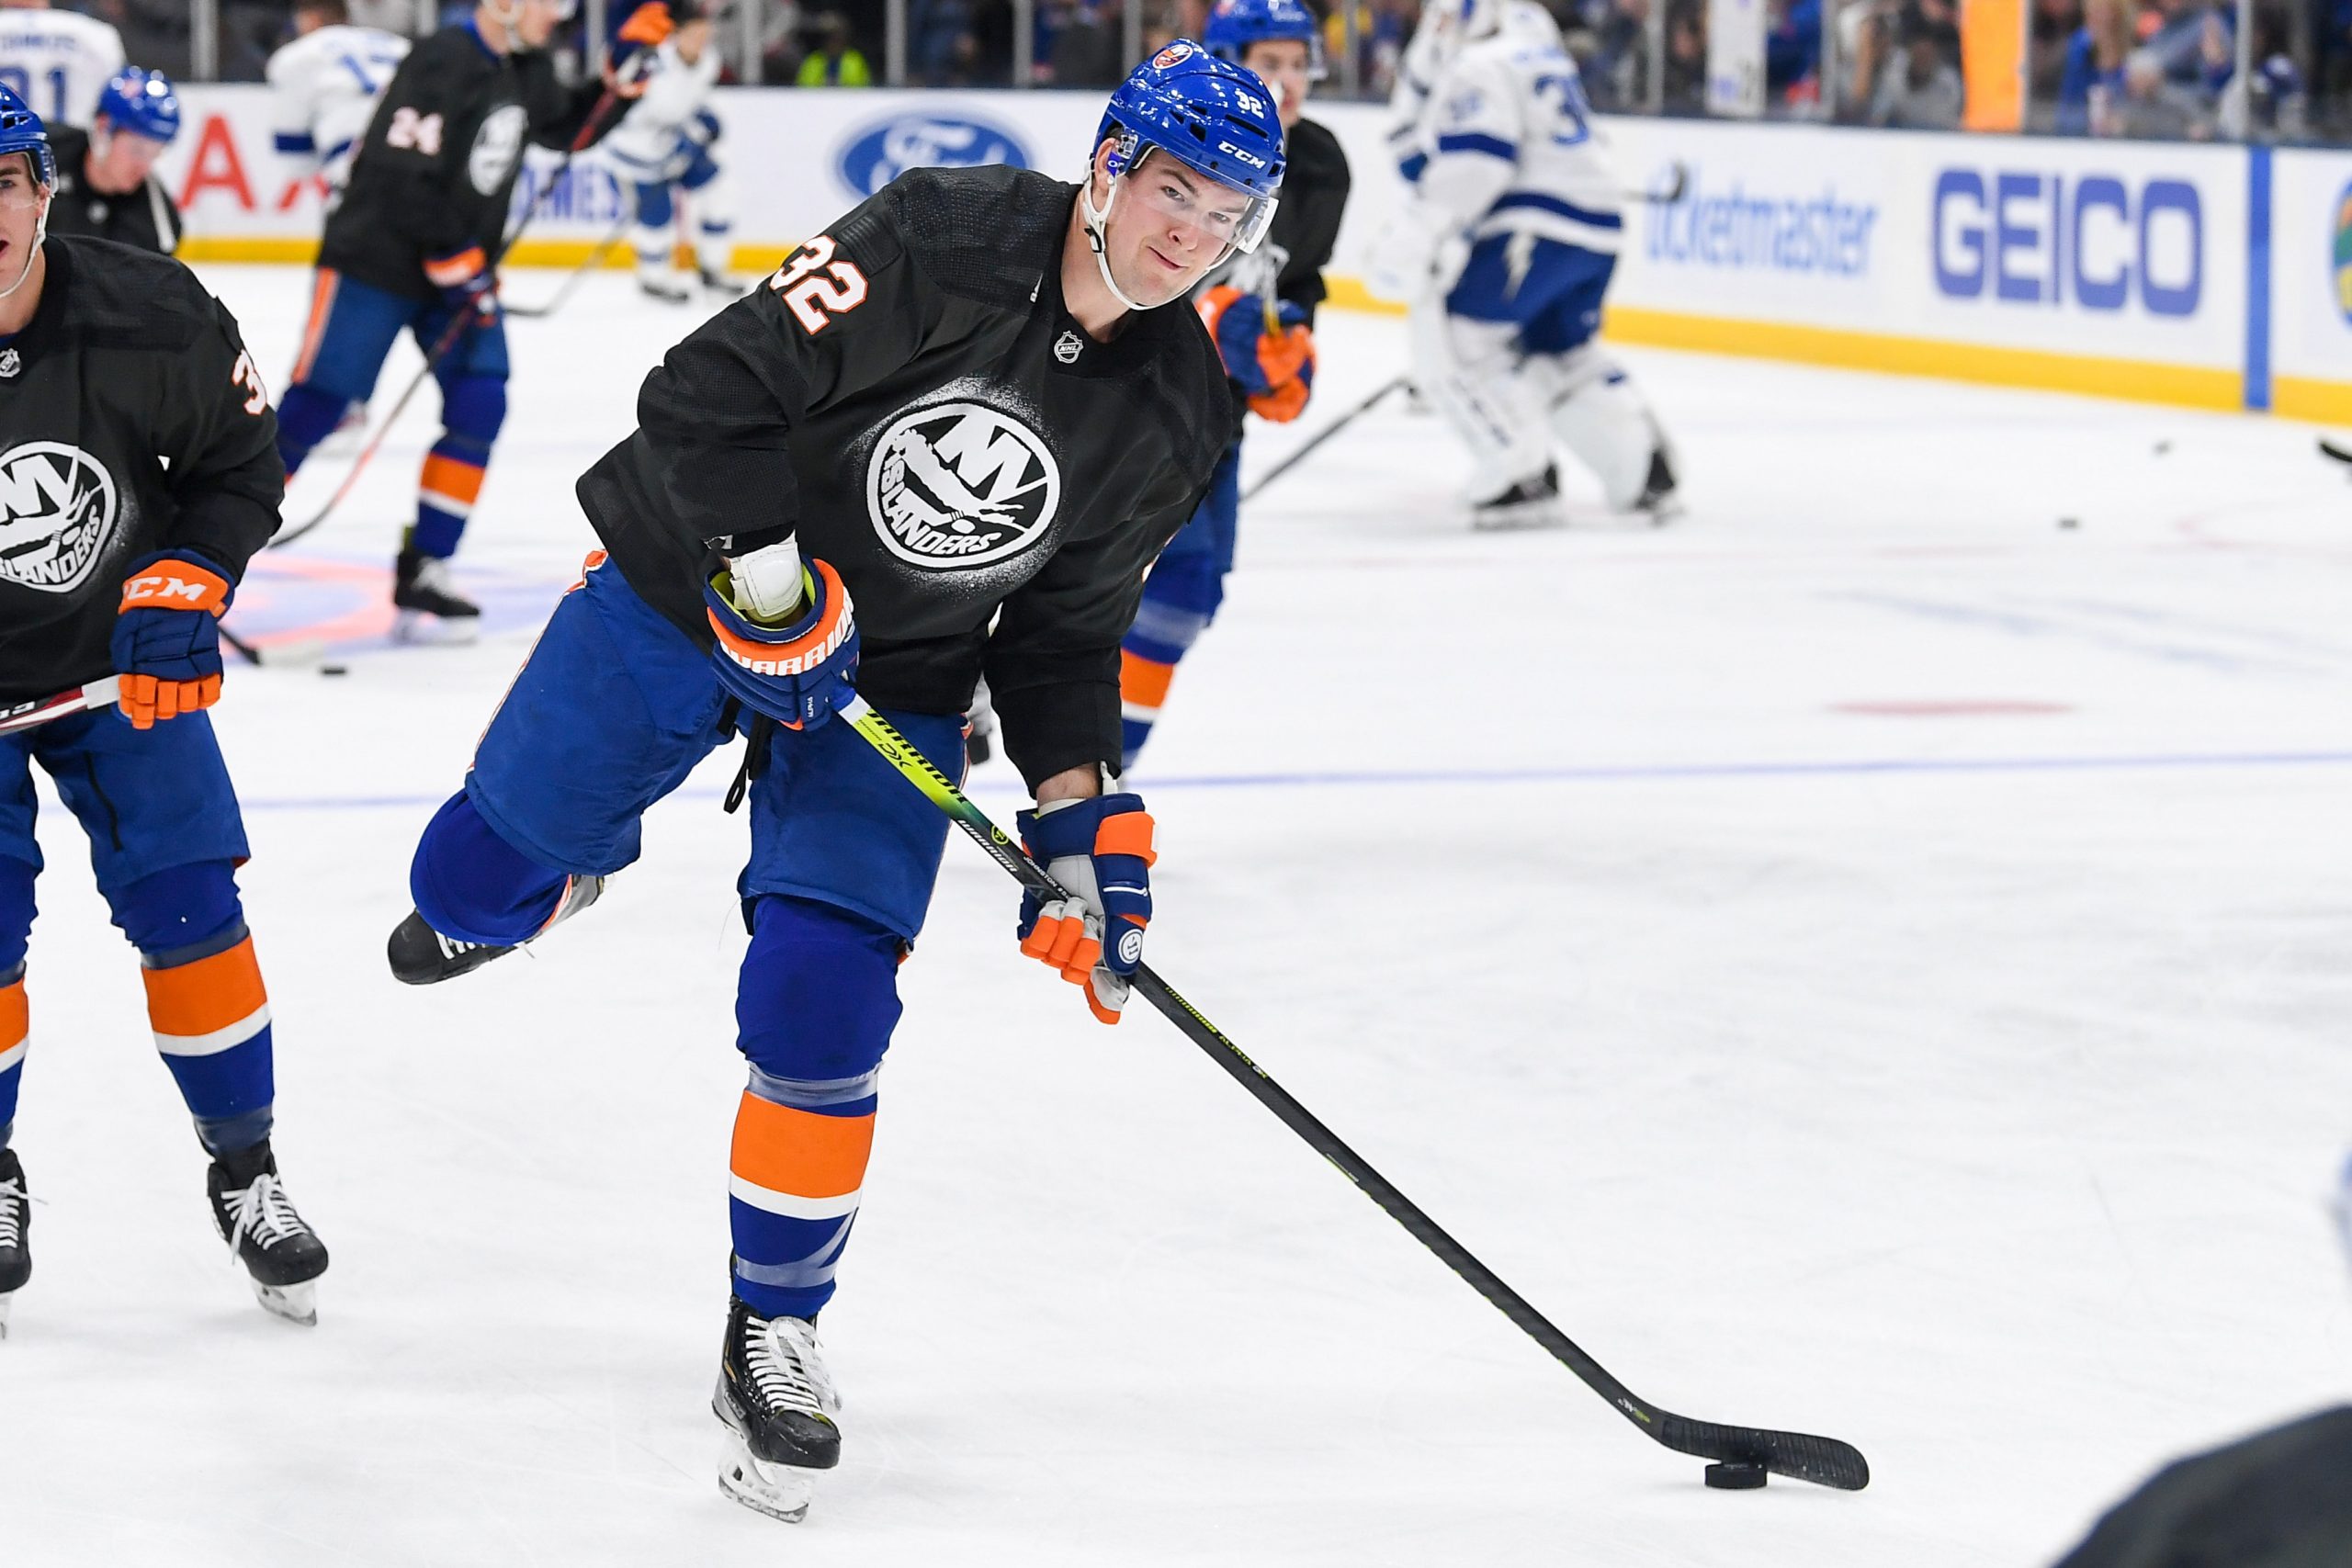 Nov 1, 2019; Uniondale, NY, USA; New York Islanders left wing Ross Johnston (32) wears his Military jersey for Military Appreciation Night before the game against the Tampa Bay Lightning at Nassau Veterans Memorial Coliseum. Mandatory Credit: Dennis Schneidler-USA TODAY Sports